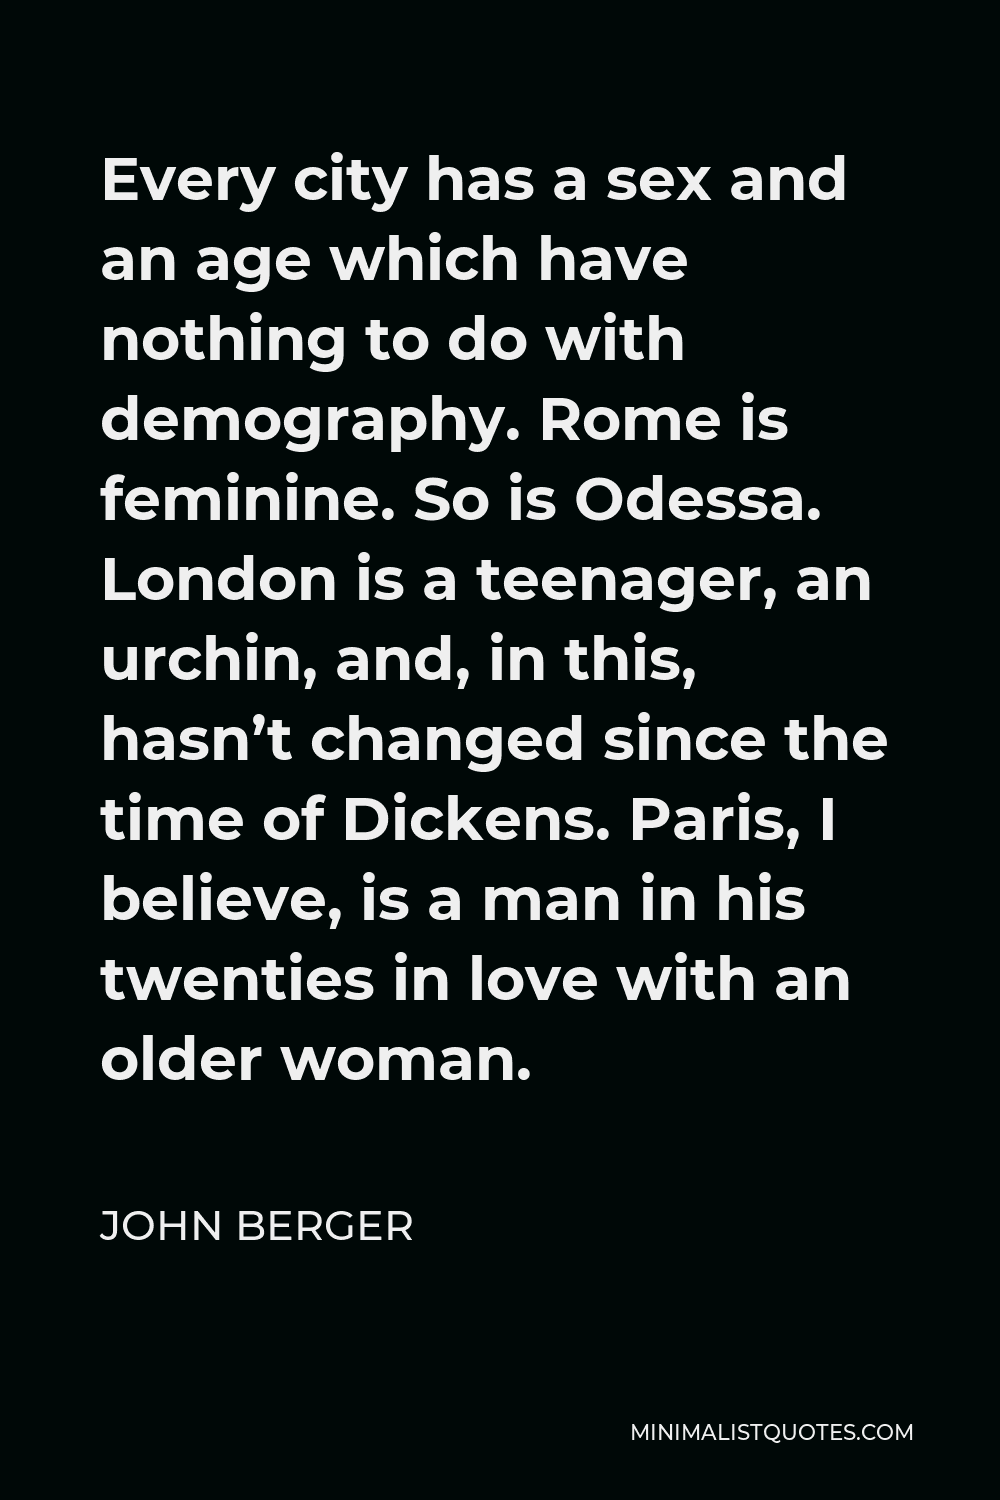 John Berger Quote - Every city has a sex and an age which have nothing to do with demography. Rome is feminine. So is Odessa. London is a teenager, an urchin, and, in this, hasn’t changed since the time of Dickens. Paris, I believe, is a man in his twenties in love with an older woman.